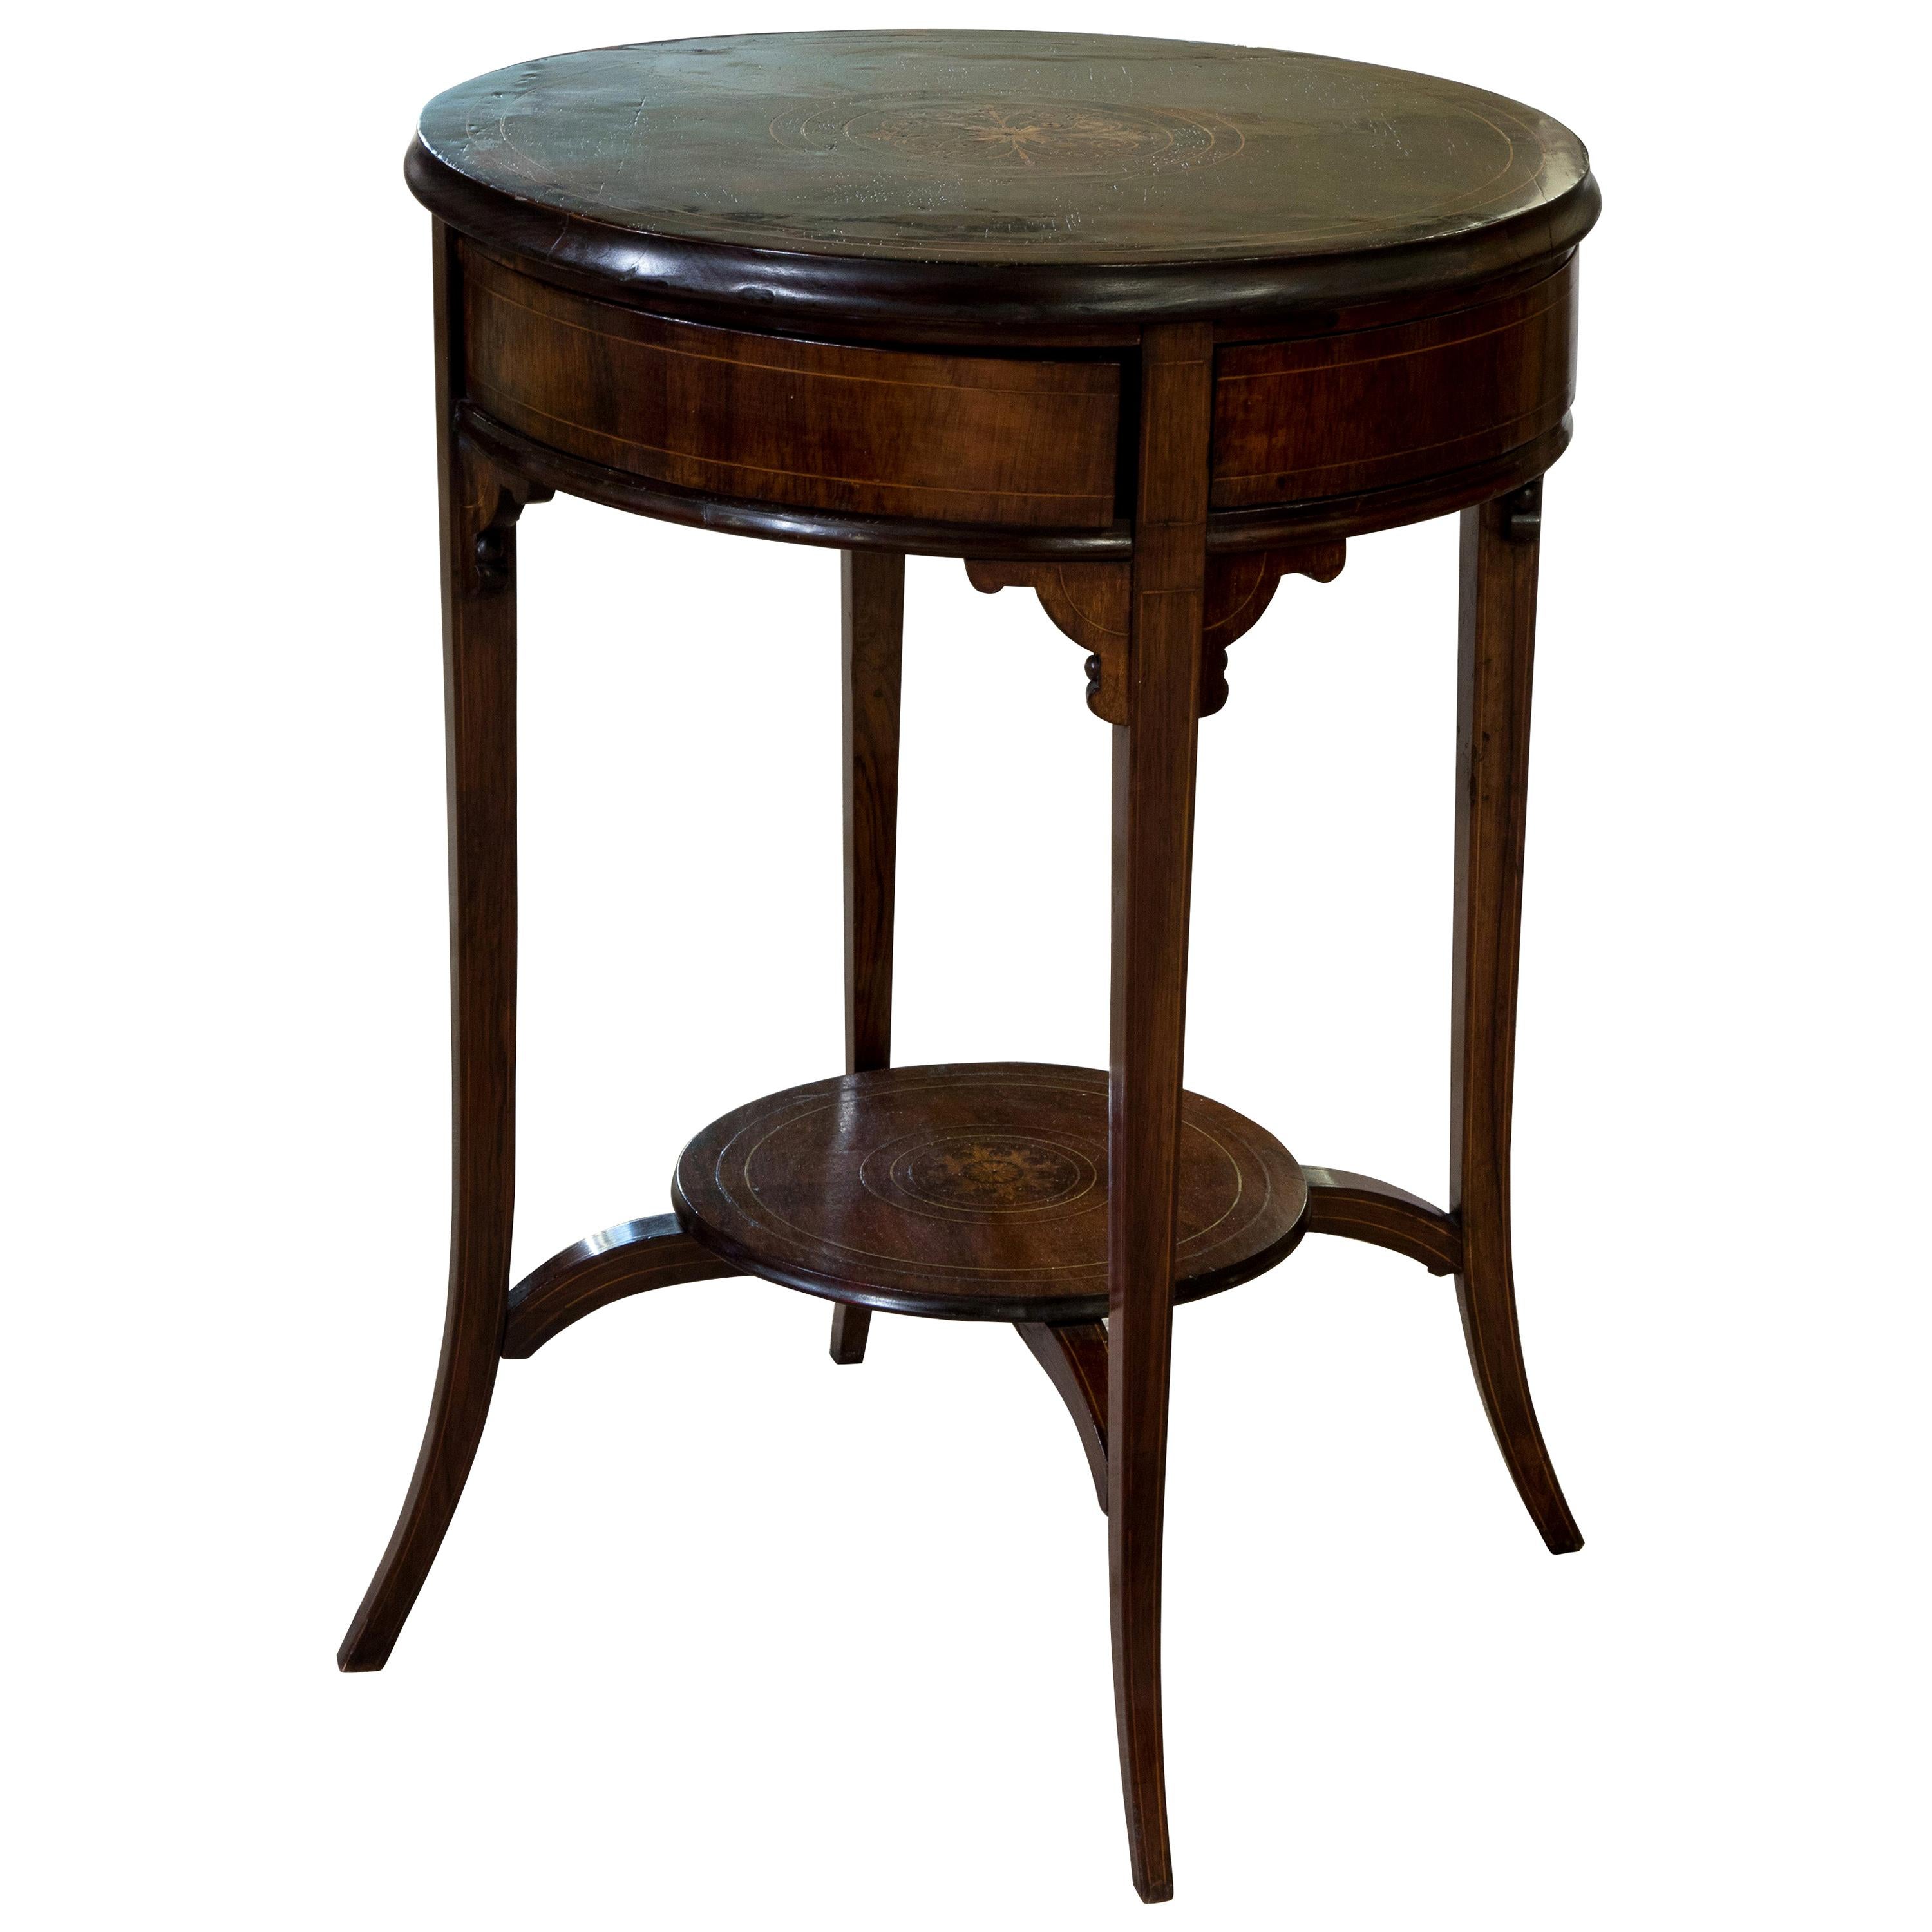 Circular Inlaid Drum Table with Rotating Top to Reveal Four Drawers For Sale